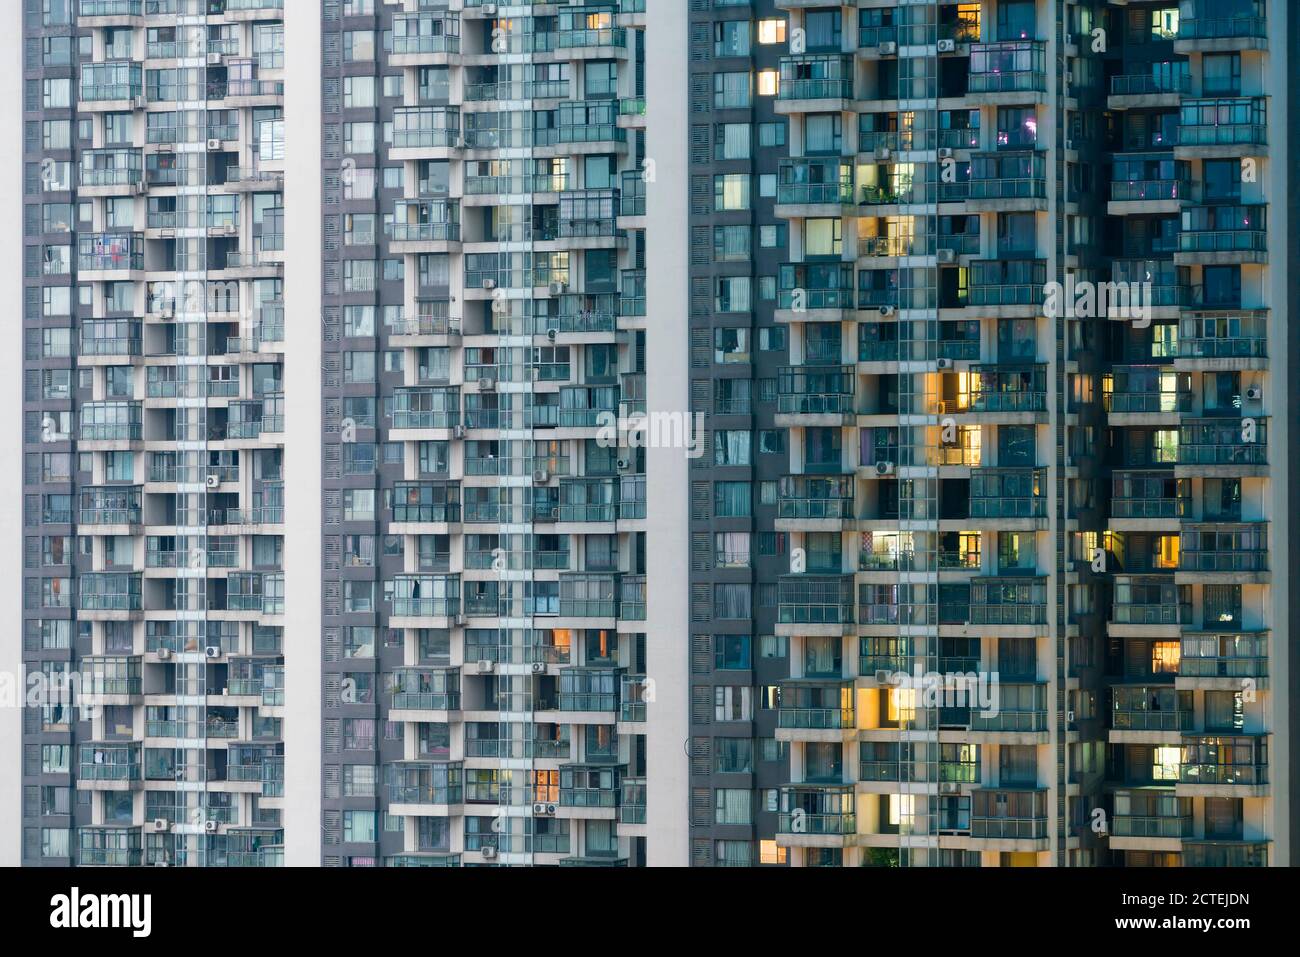 High rise apartment buildings from day to night Stock Photo